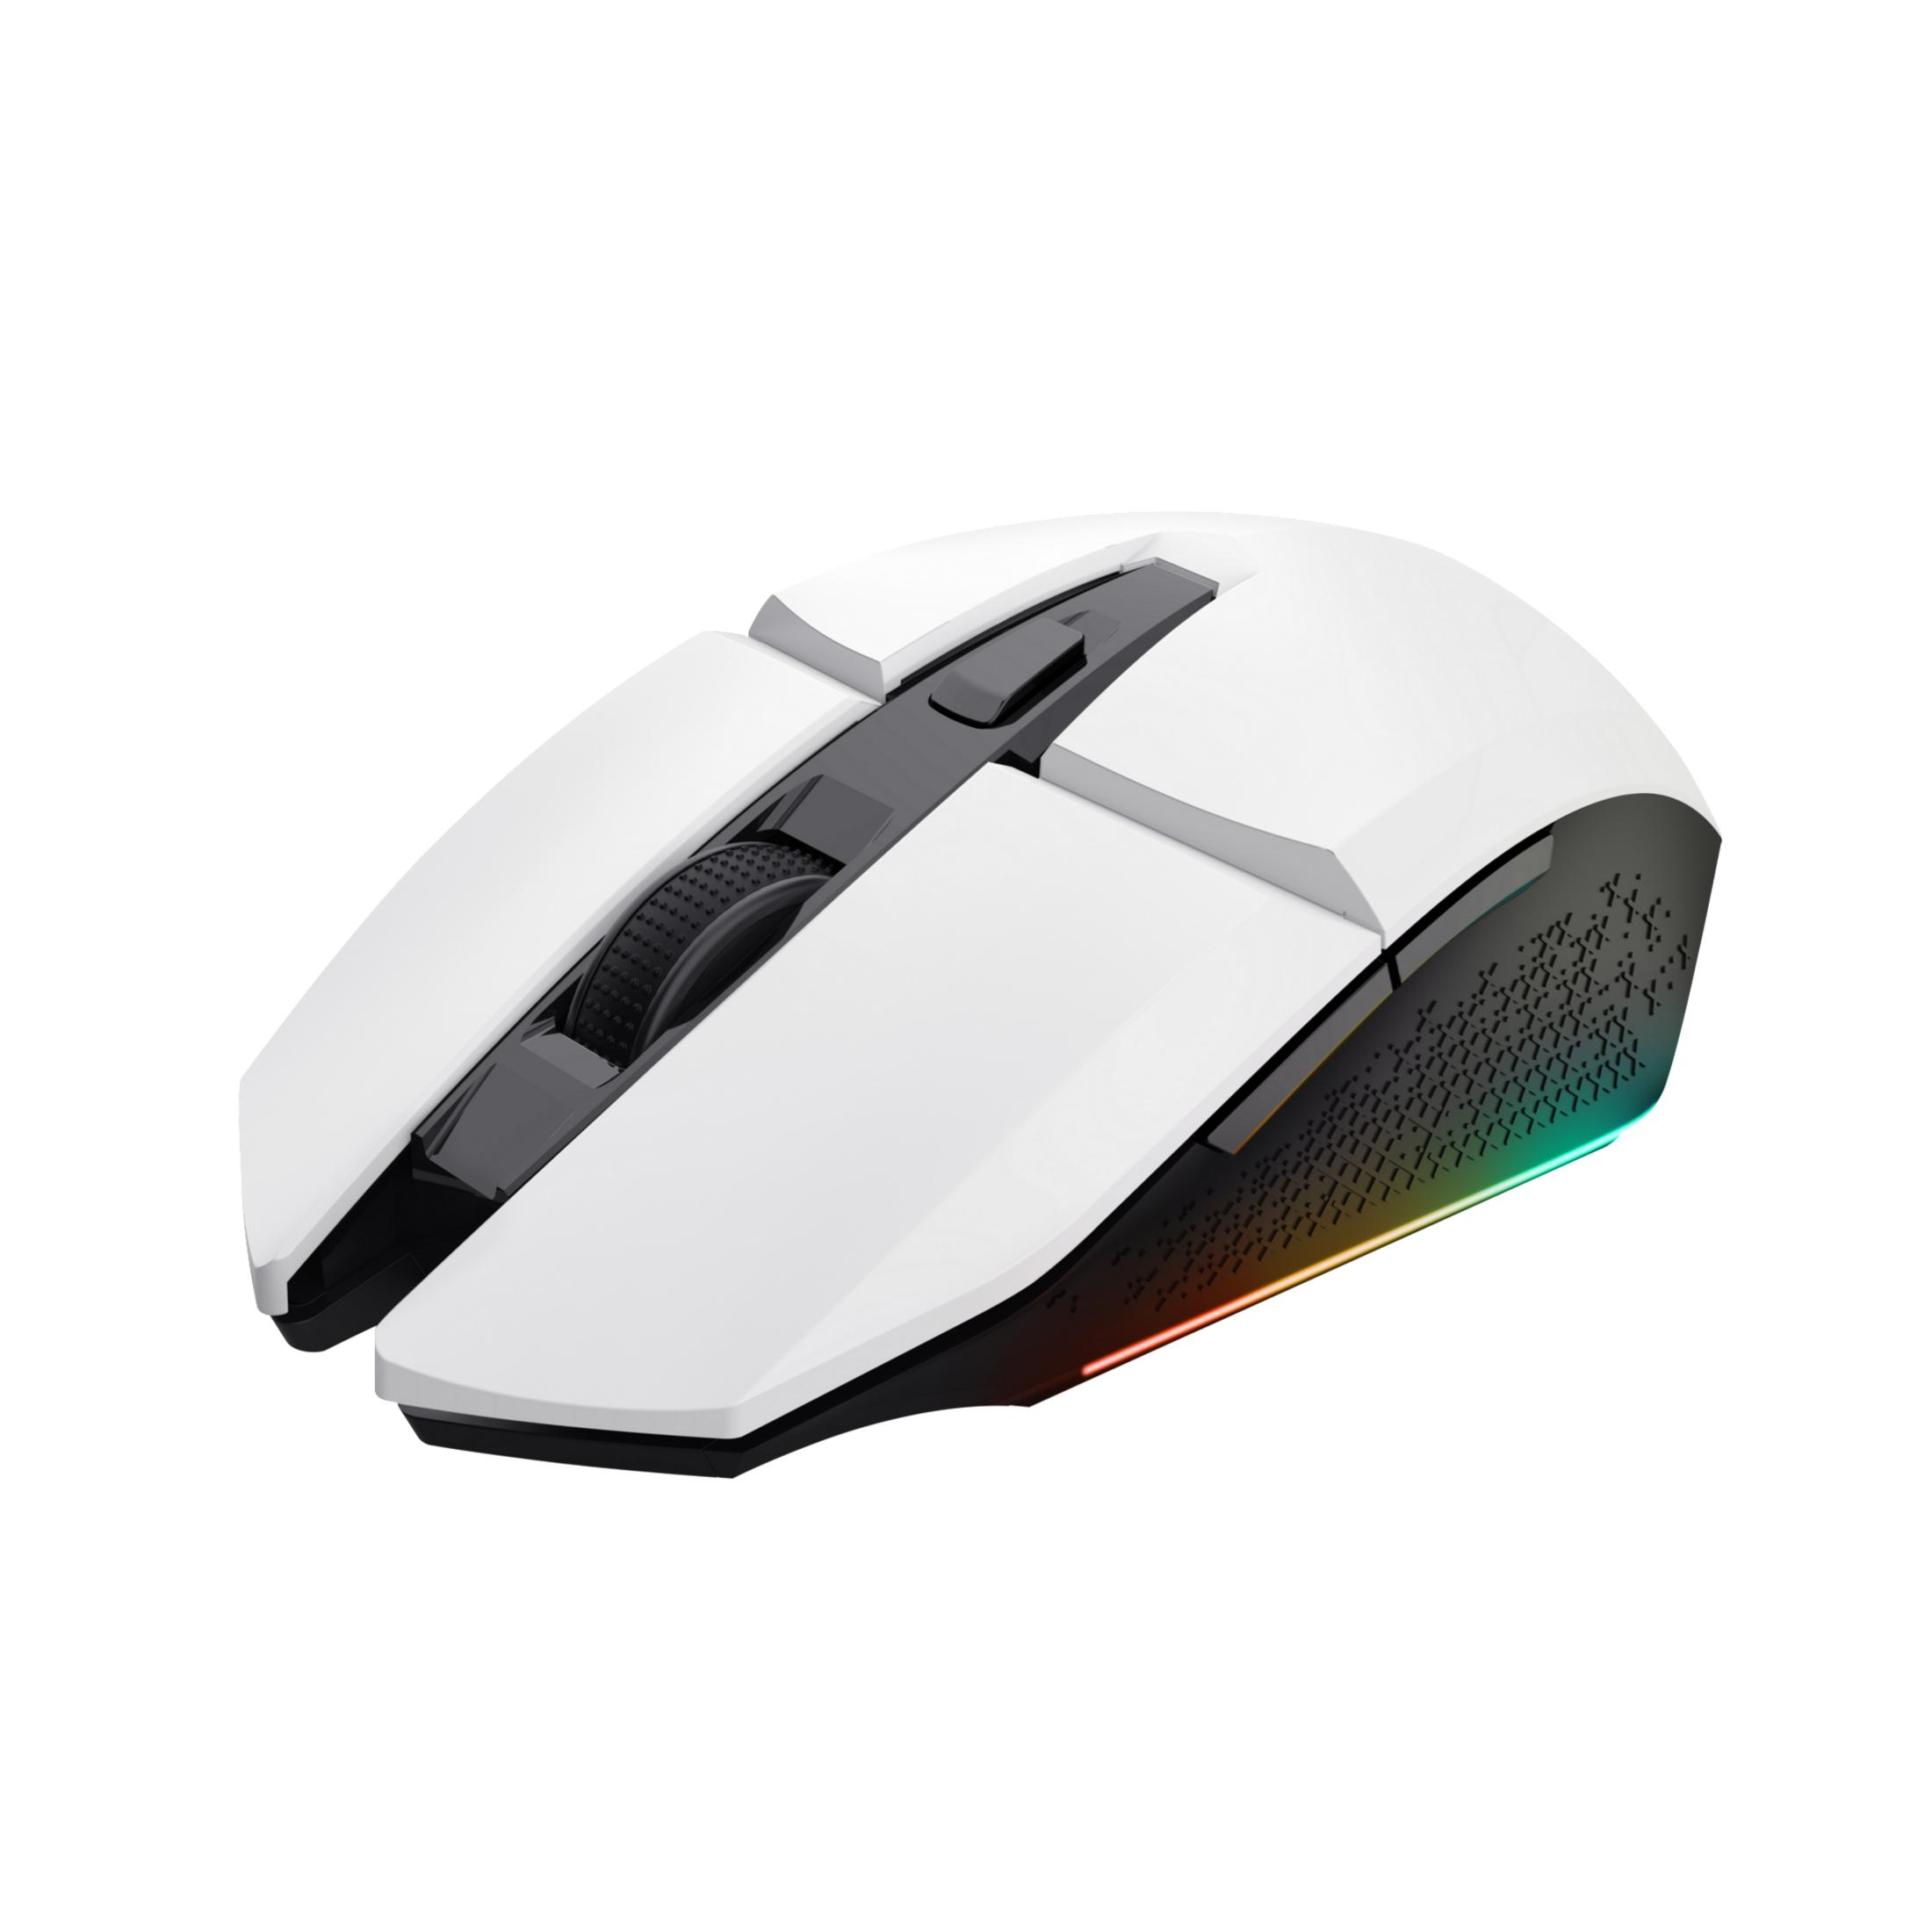 TRUST WIRELESS WHITE Gaming MOUSE Winning GXT110W 25069 White Maus, FELOX